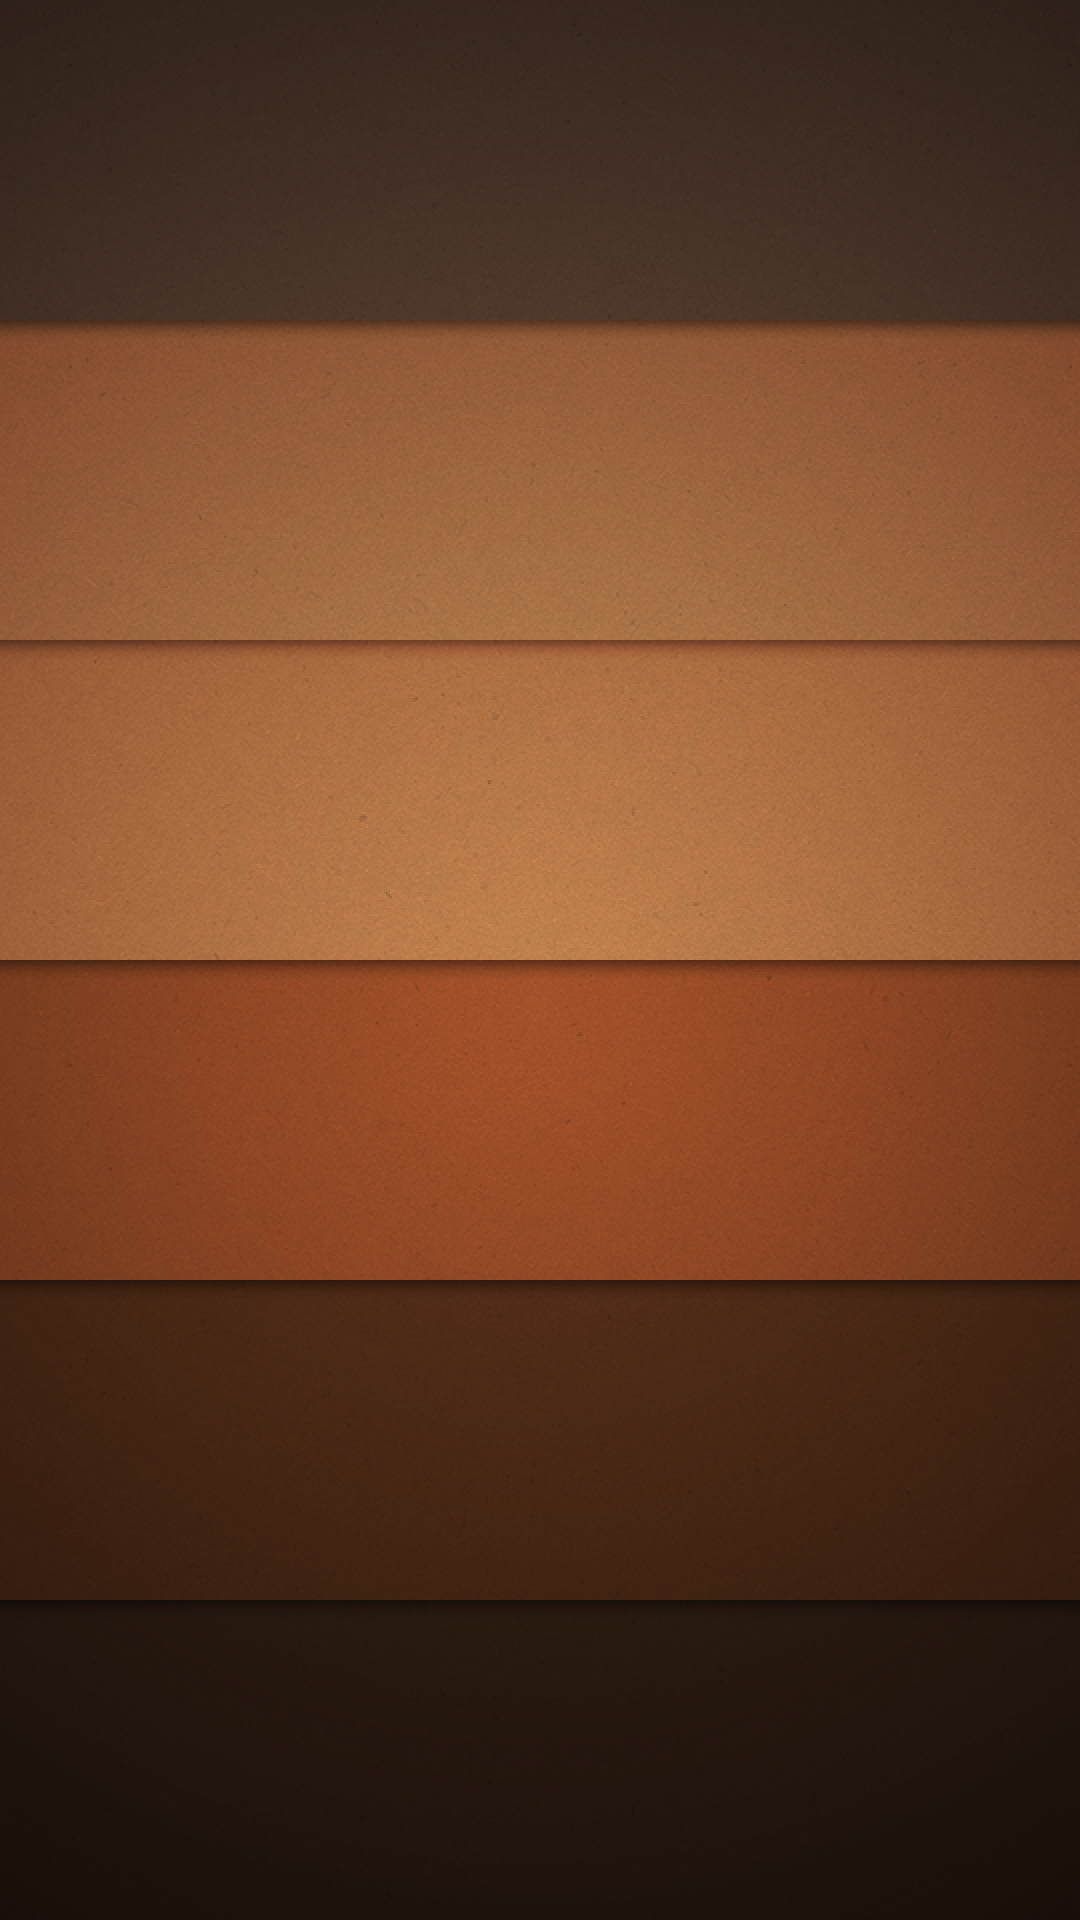 android marshmallow wallpaper 1080p,orange,brown,yellow,line,sky